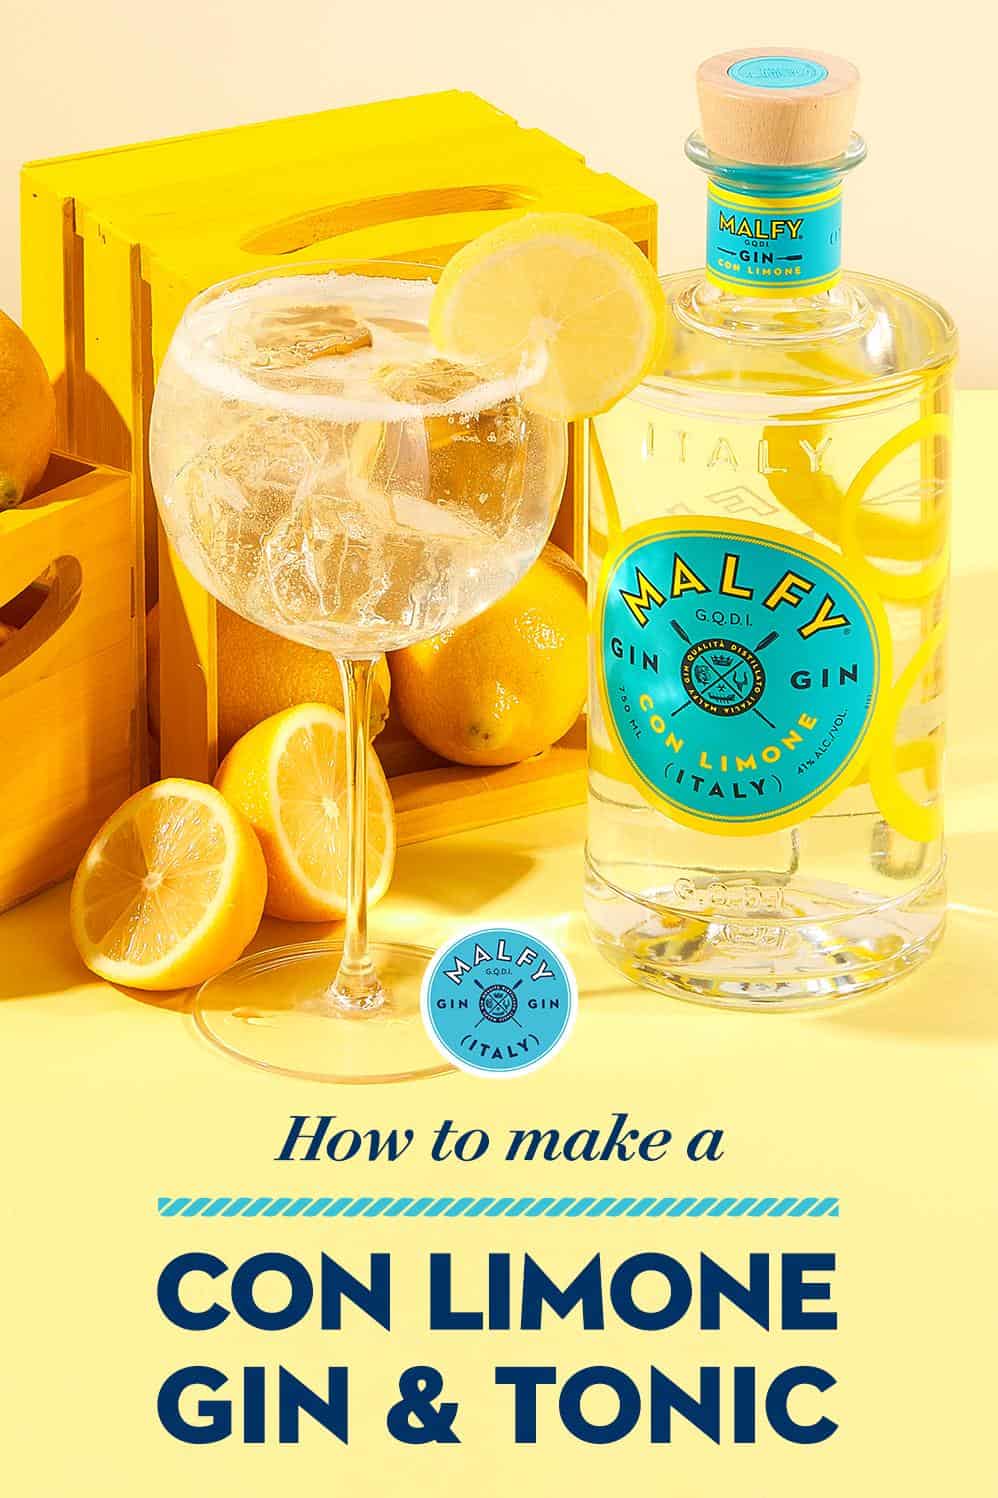  Let the fresh flavors of lemon and gin take you to Italy.